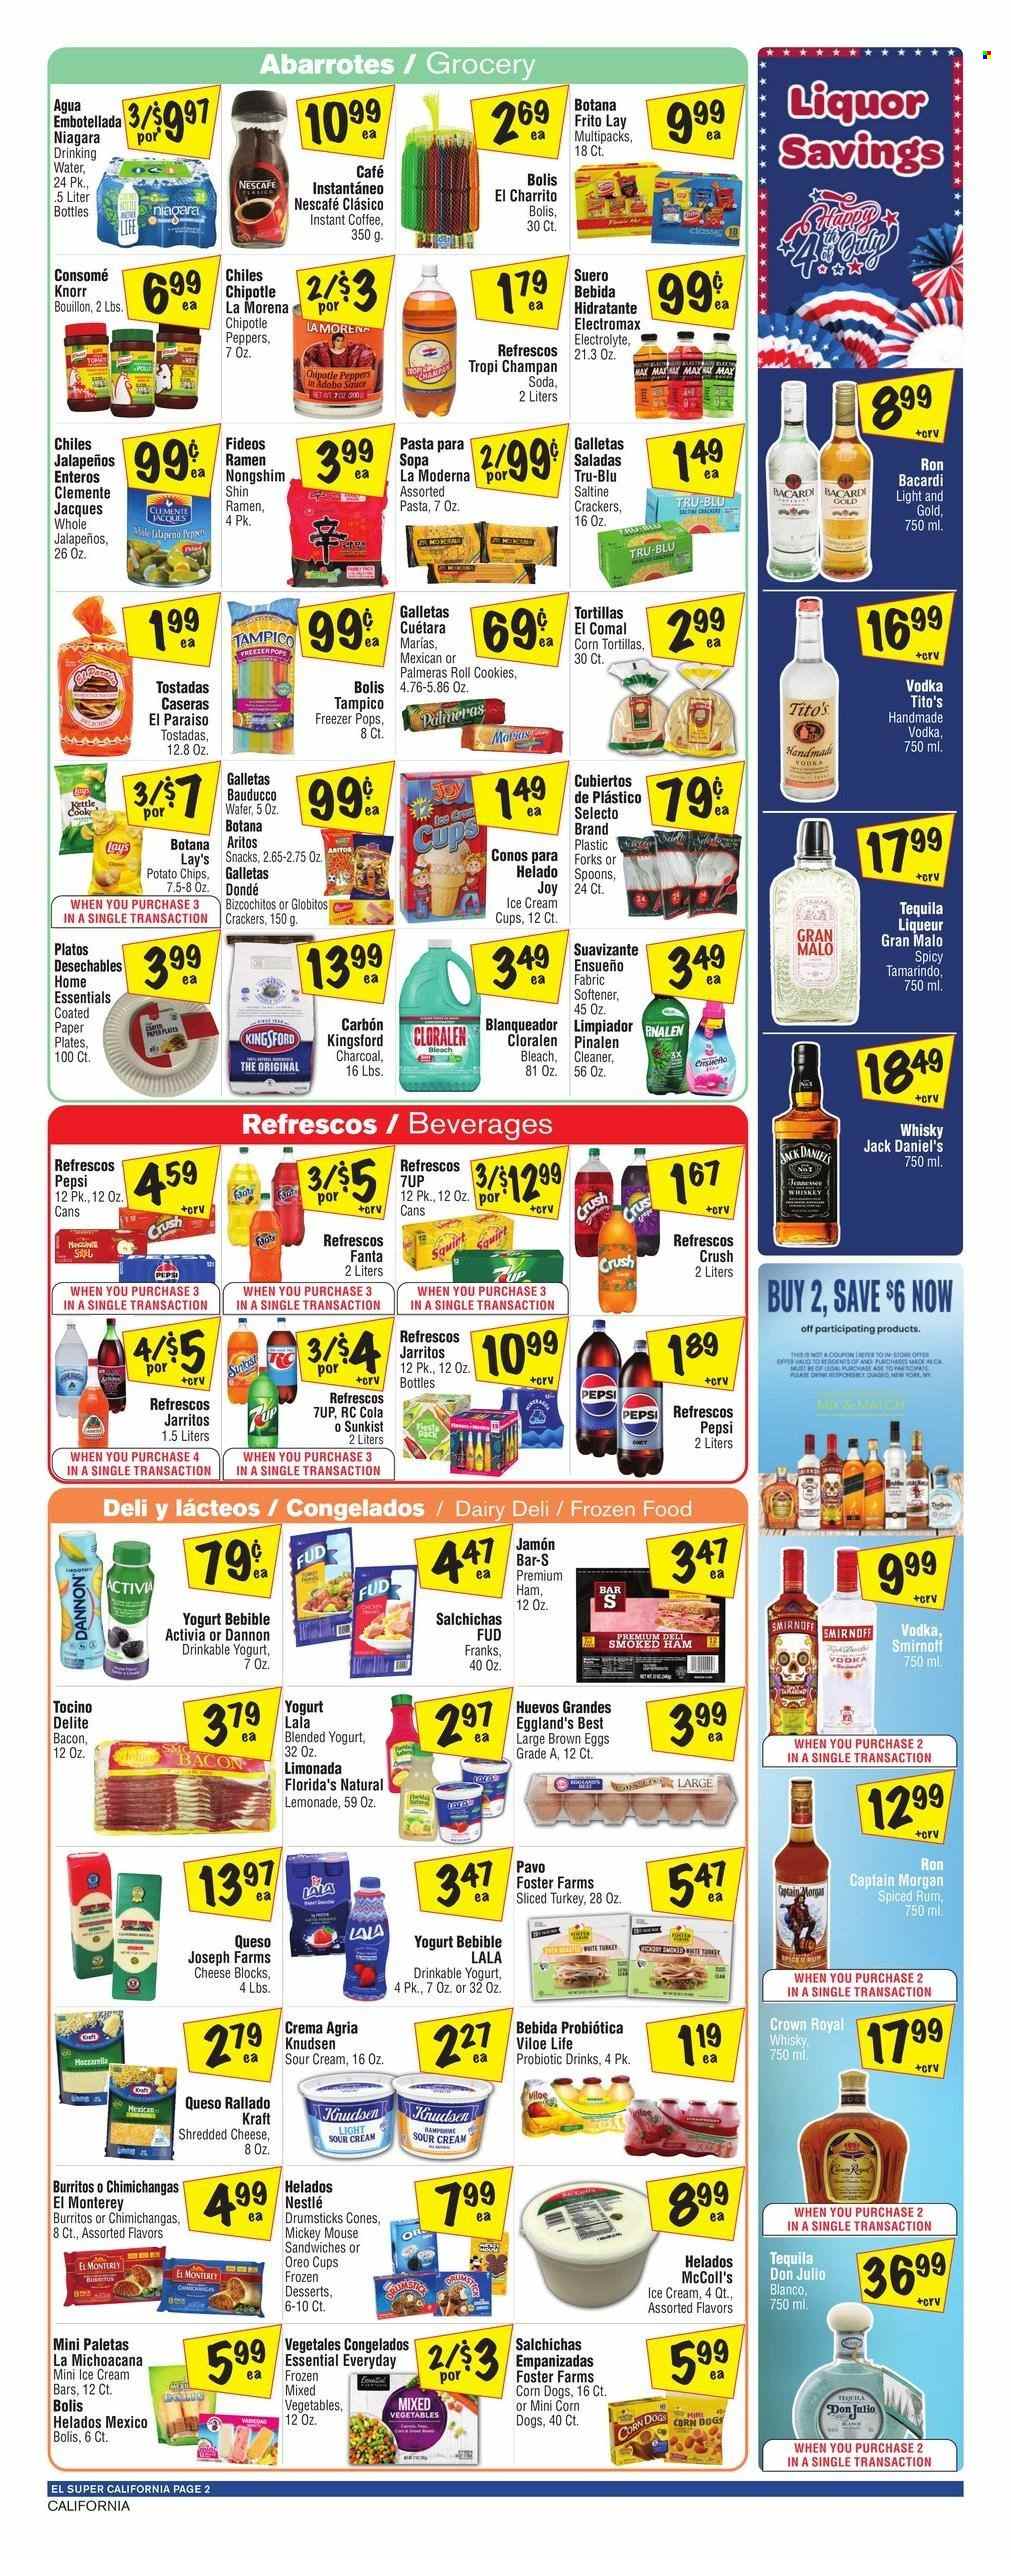 thumbnail - El Super Flyer - 06/26/2024 - 07/02/2024 - Sales products - corn tortillas, tortillas, tostadas, dessert, mixed vegetables, peppers, ramen, Jack Daniel's, sandwich, snack, pasta, instant noodles, Knorr, burrito, Kraft®, Kingsford, ready meal, sliced turkey, ham, frankfurters, mozzarella, shredded cheese, cheese, Oreo, Activia, Dannon, yoghurt drink, probiotic drink, eggs, large eggs, sour cream, ice cream, ice cream bars, Mickey Mouse, ice cones, frozen vegetables, Nestlé, crackers, Florida's Natural, waffle cones, potato chips, Lay’s, salty snack, bouillon, canned vegetables, lemonade, Pepsi, Fanta, soft drink, 7UP, fruit punch, soda, carbonated soft drink, instant coffee, Nescafé, alcohol, Bacardi, Captain Morgan, rum, Smirnoff, spiced rum, tequila, vodka, liquor, whisky, bleach, fabric softener, spoon, plate, comal, paper plate. Page 2.